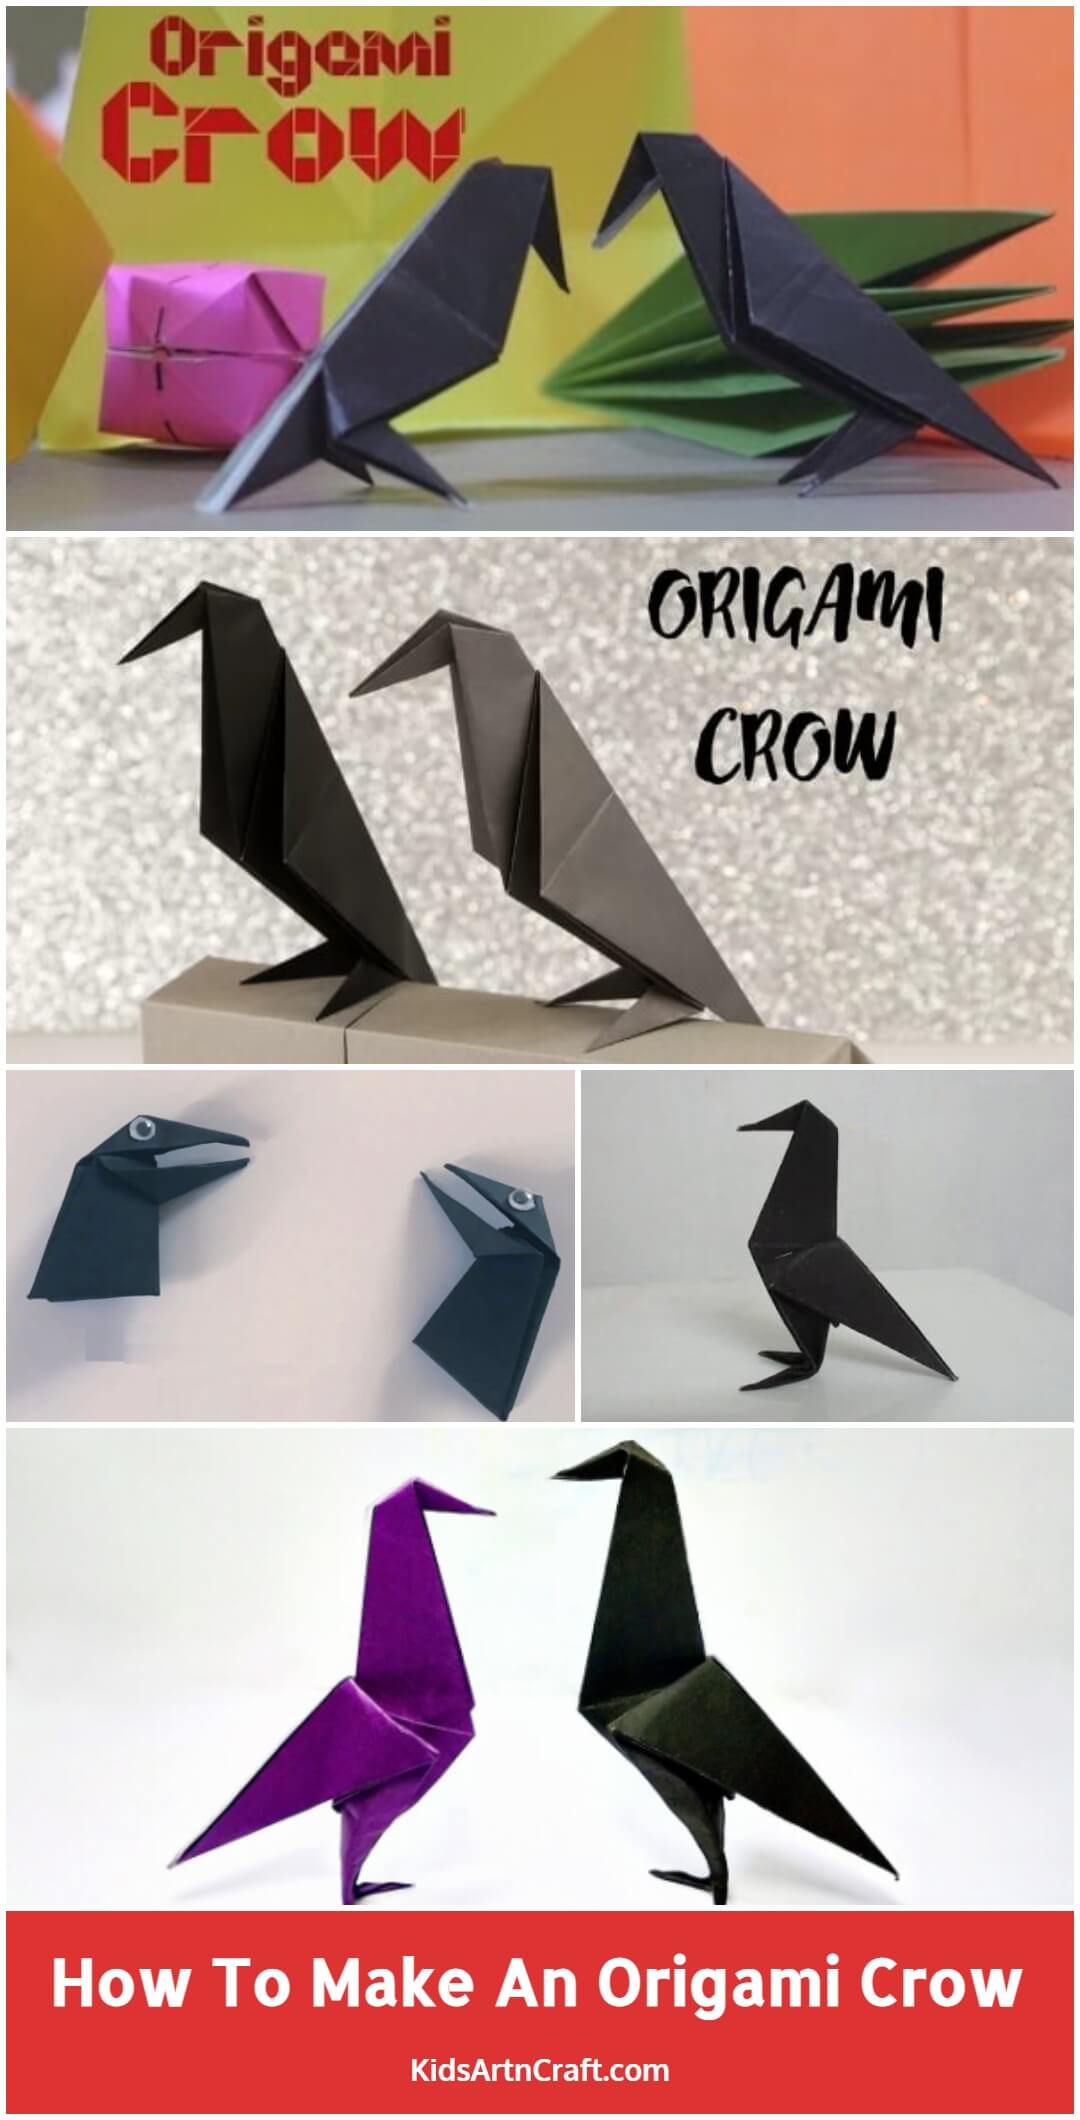 How To Make An Origami Crow With Kids